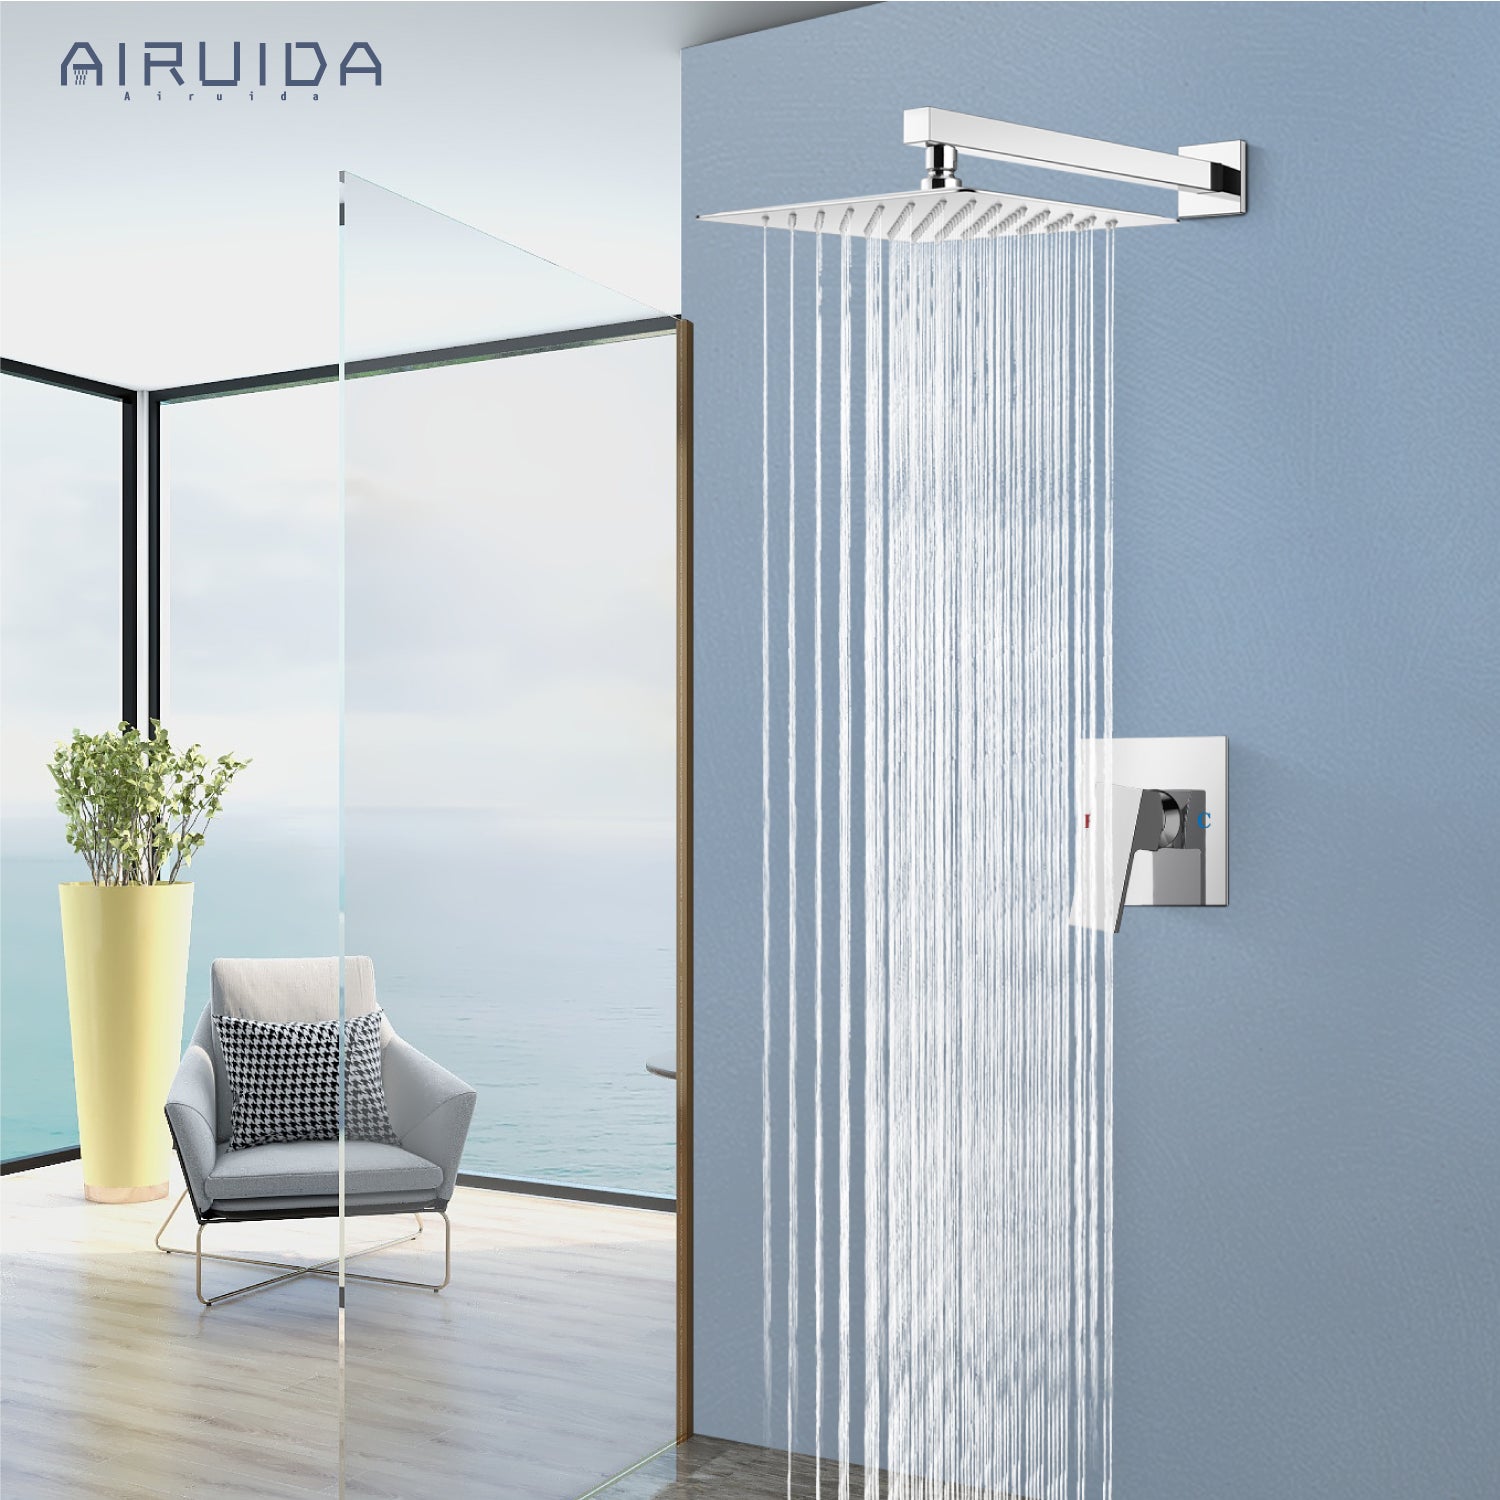 Airuida Shower Faucet Set, Single Function Wall Mount Bathroom Rainfall Shower System, Shower Head Shower Valve and Trim Kit with Male Thread Rough-in Valve